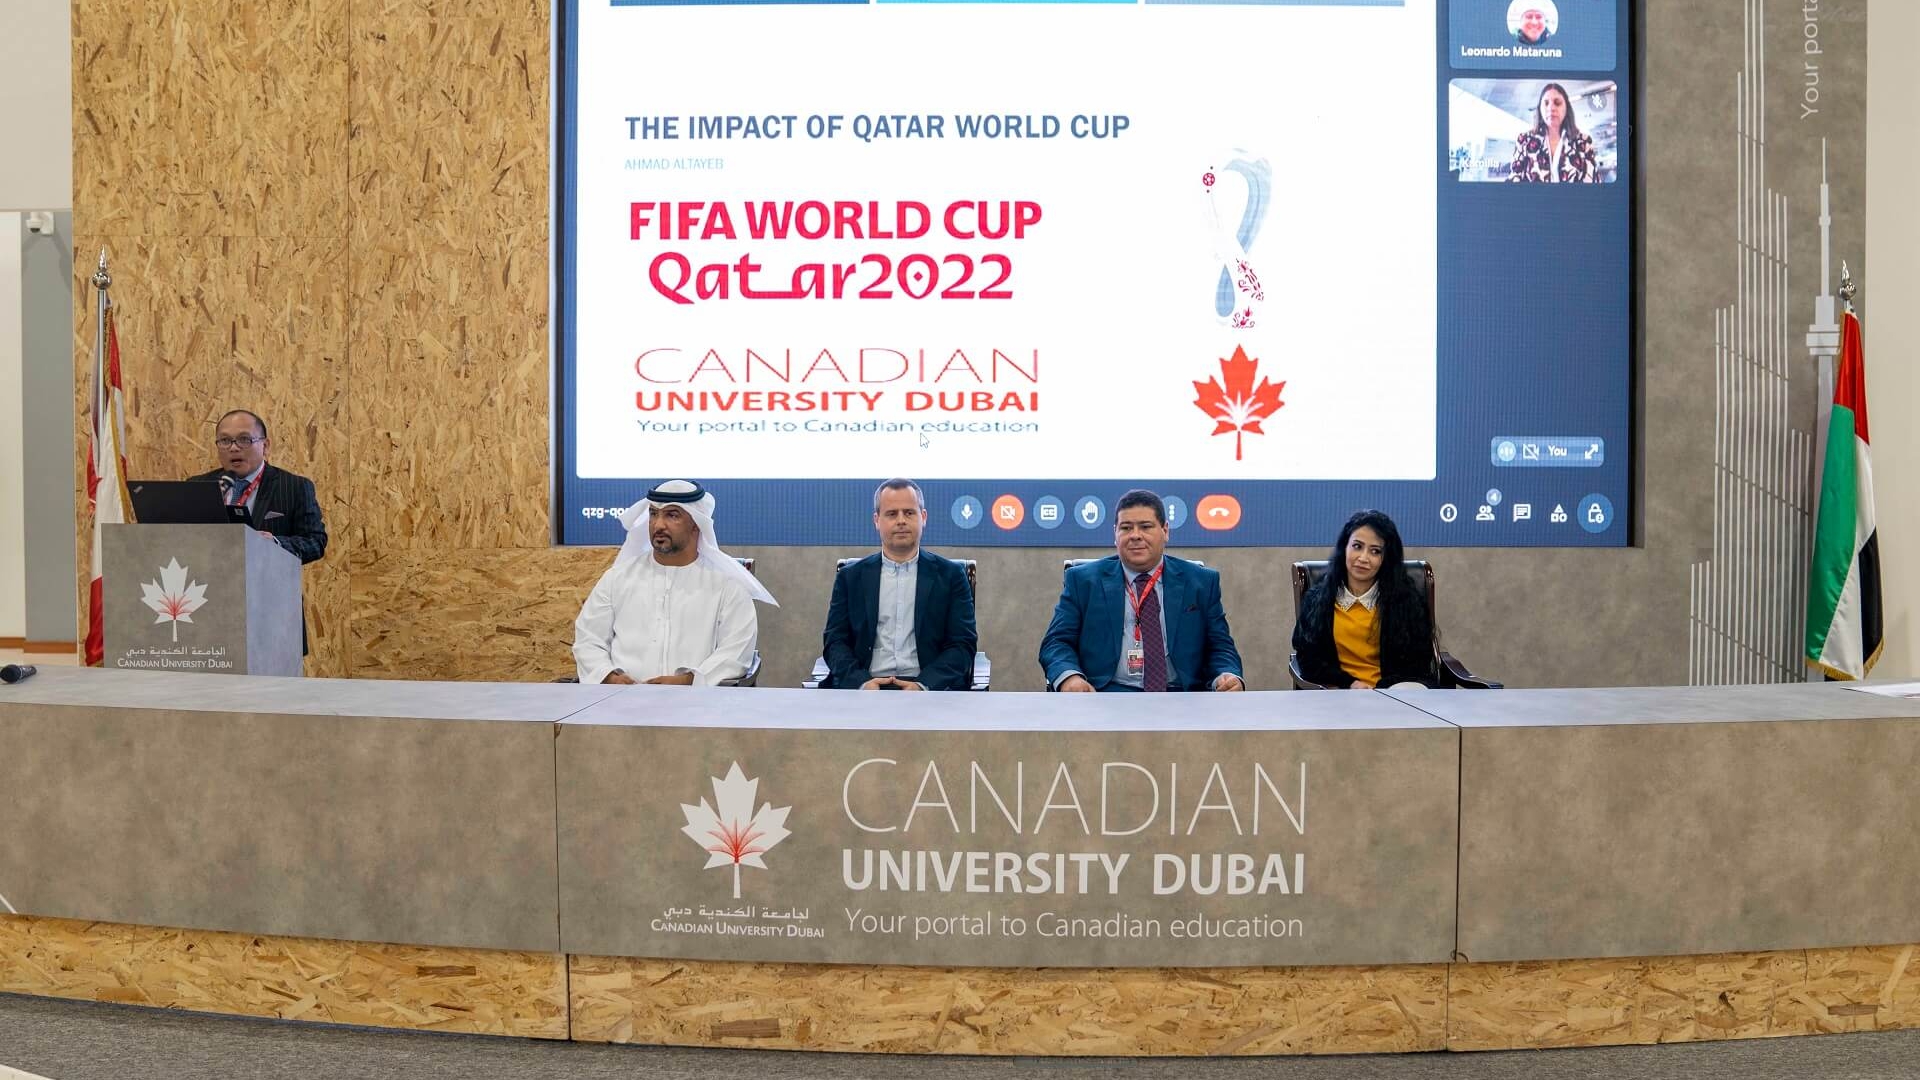 FIFA 2022 World Cup in Qatar: Global, Regional, and Local Perspectives